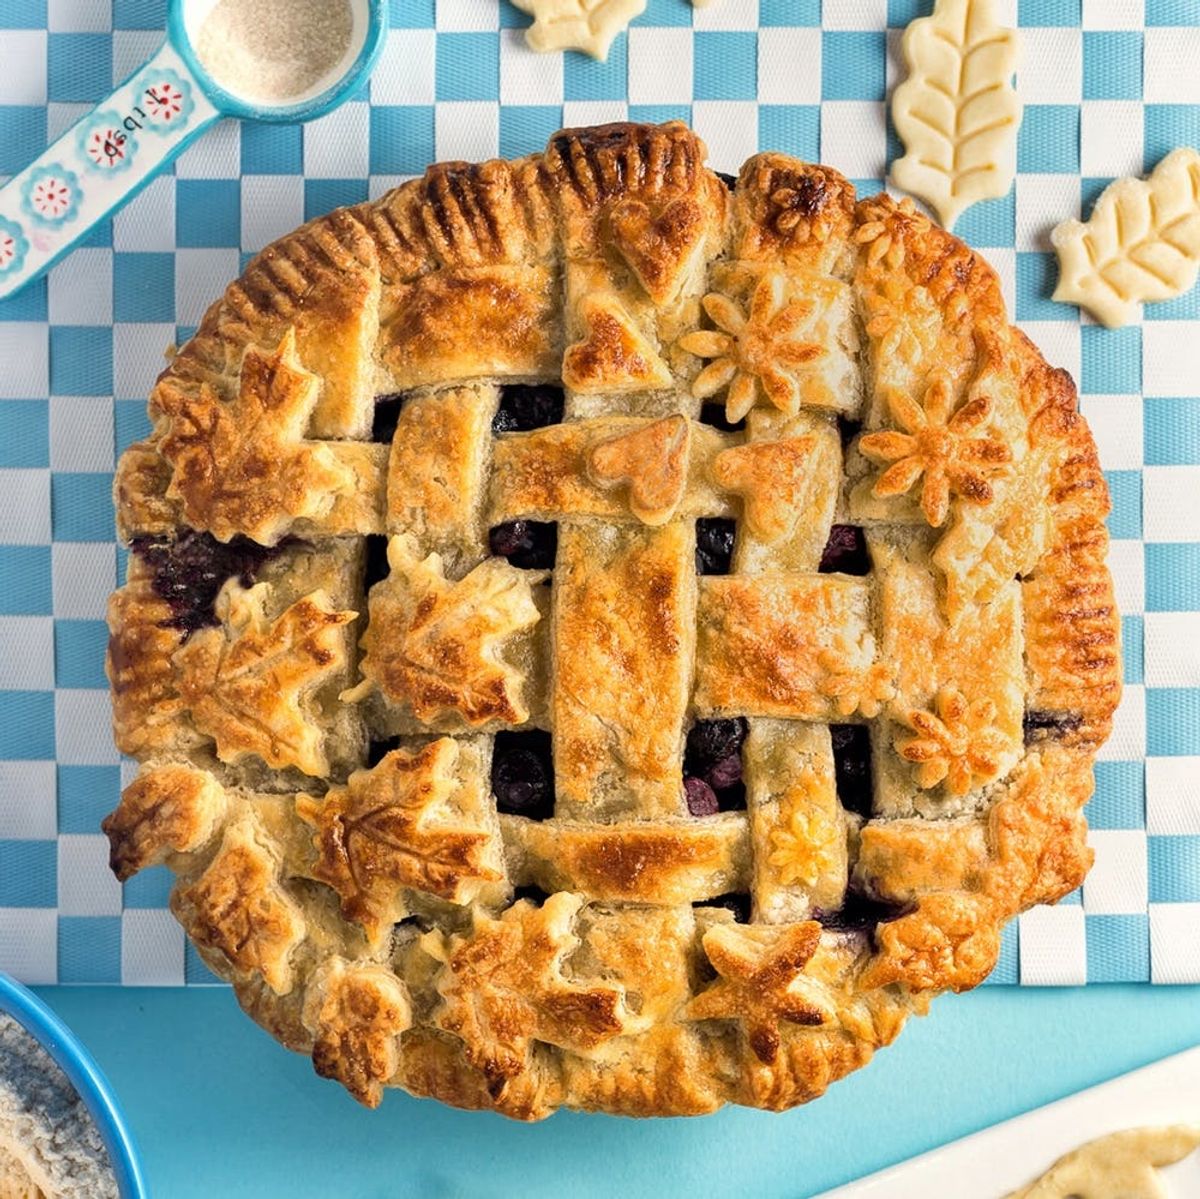 Celebrate Pie Day With This Classic Blueberry Pie Recipe